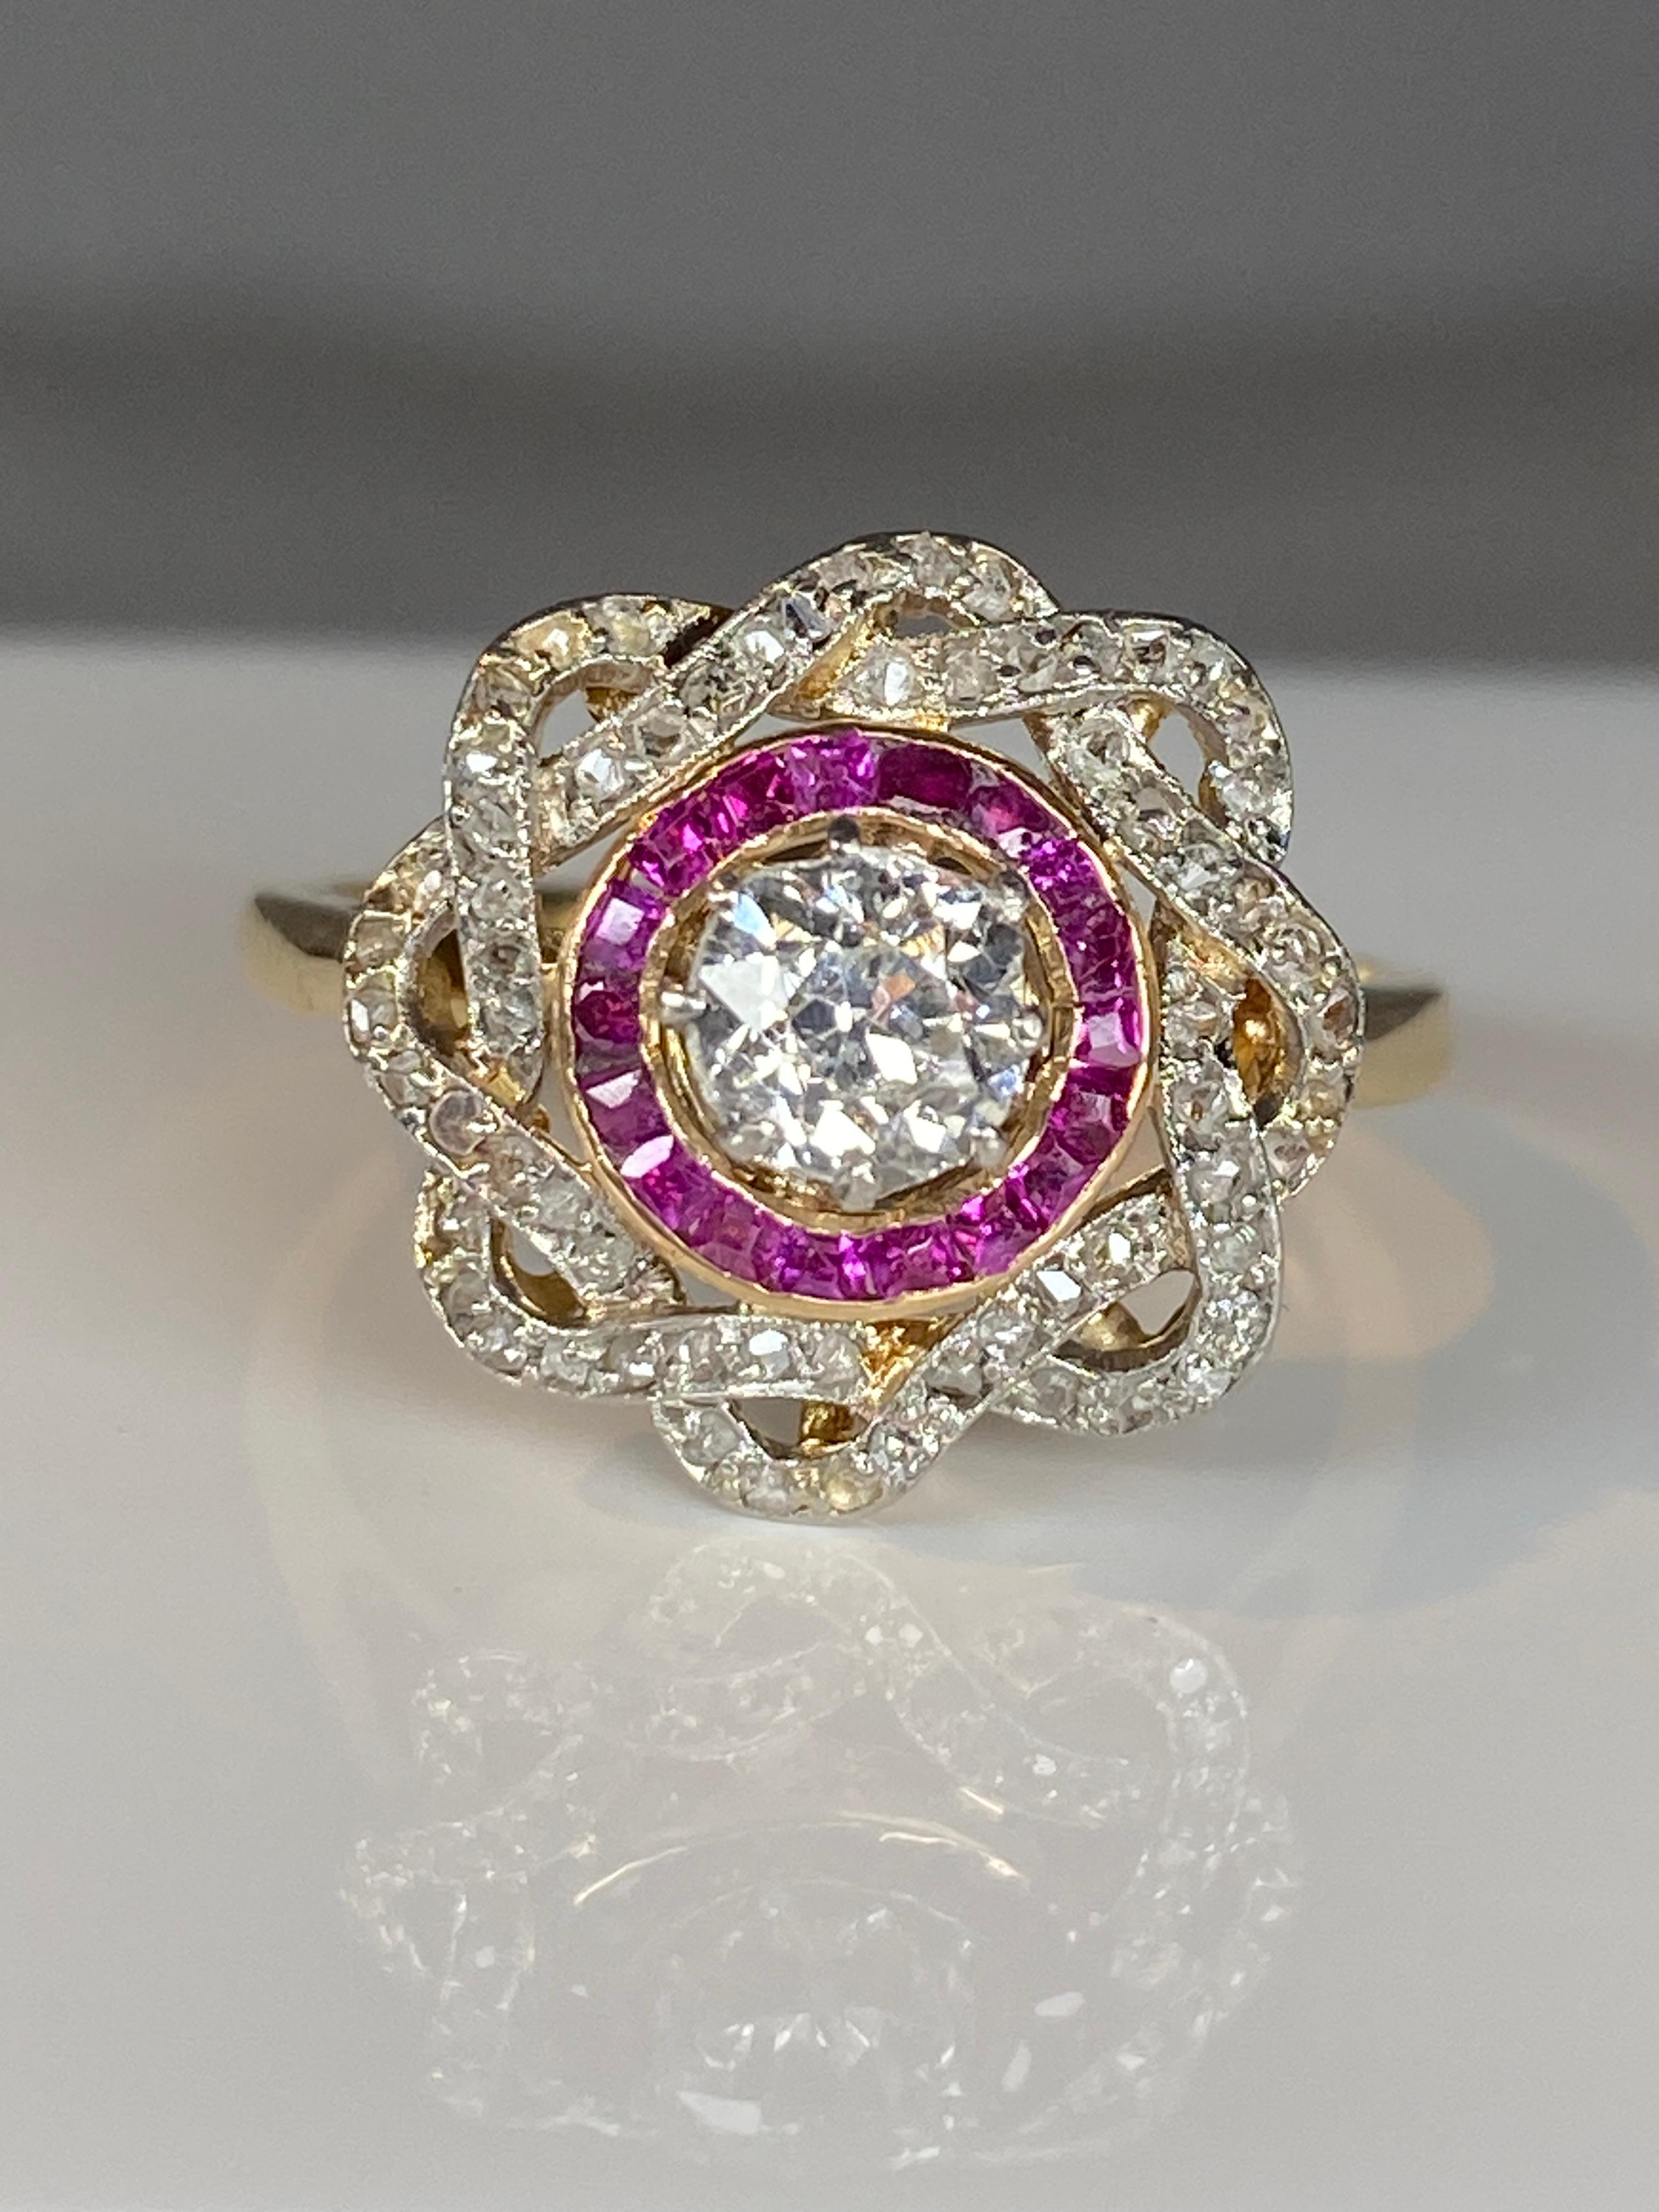 Women's or Men's 18 Carat Gold Ring, Flower Model, Set with Diamonds and Rubies, circa 1900